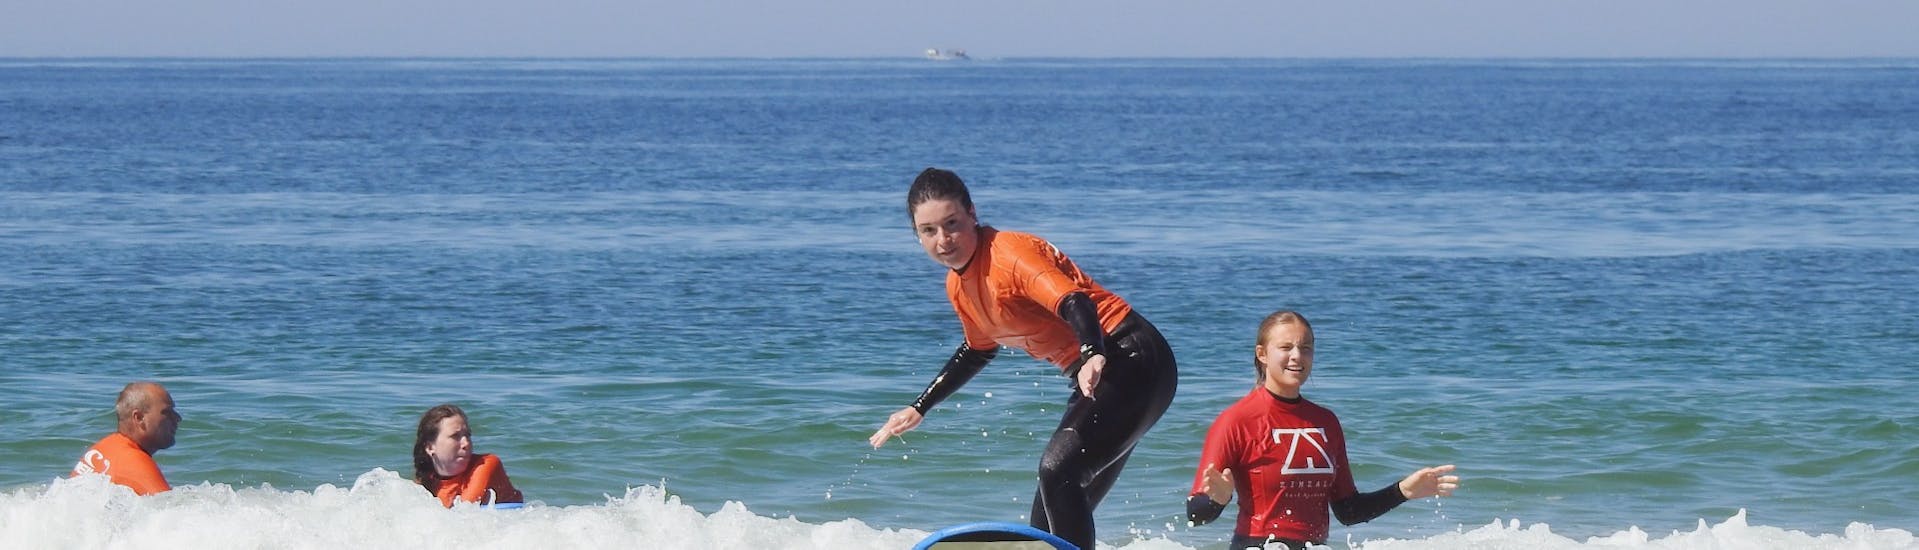 A girl riding a wave during the surfing lessons in Albufeira for beginners with Albufeira Surf & SUP.